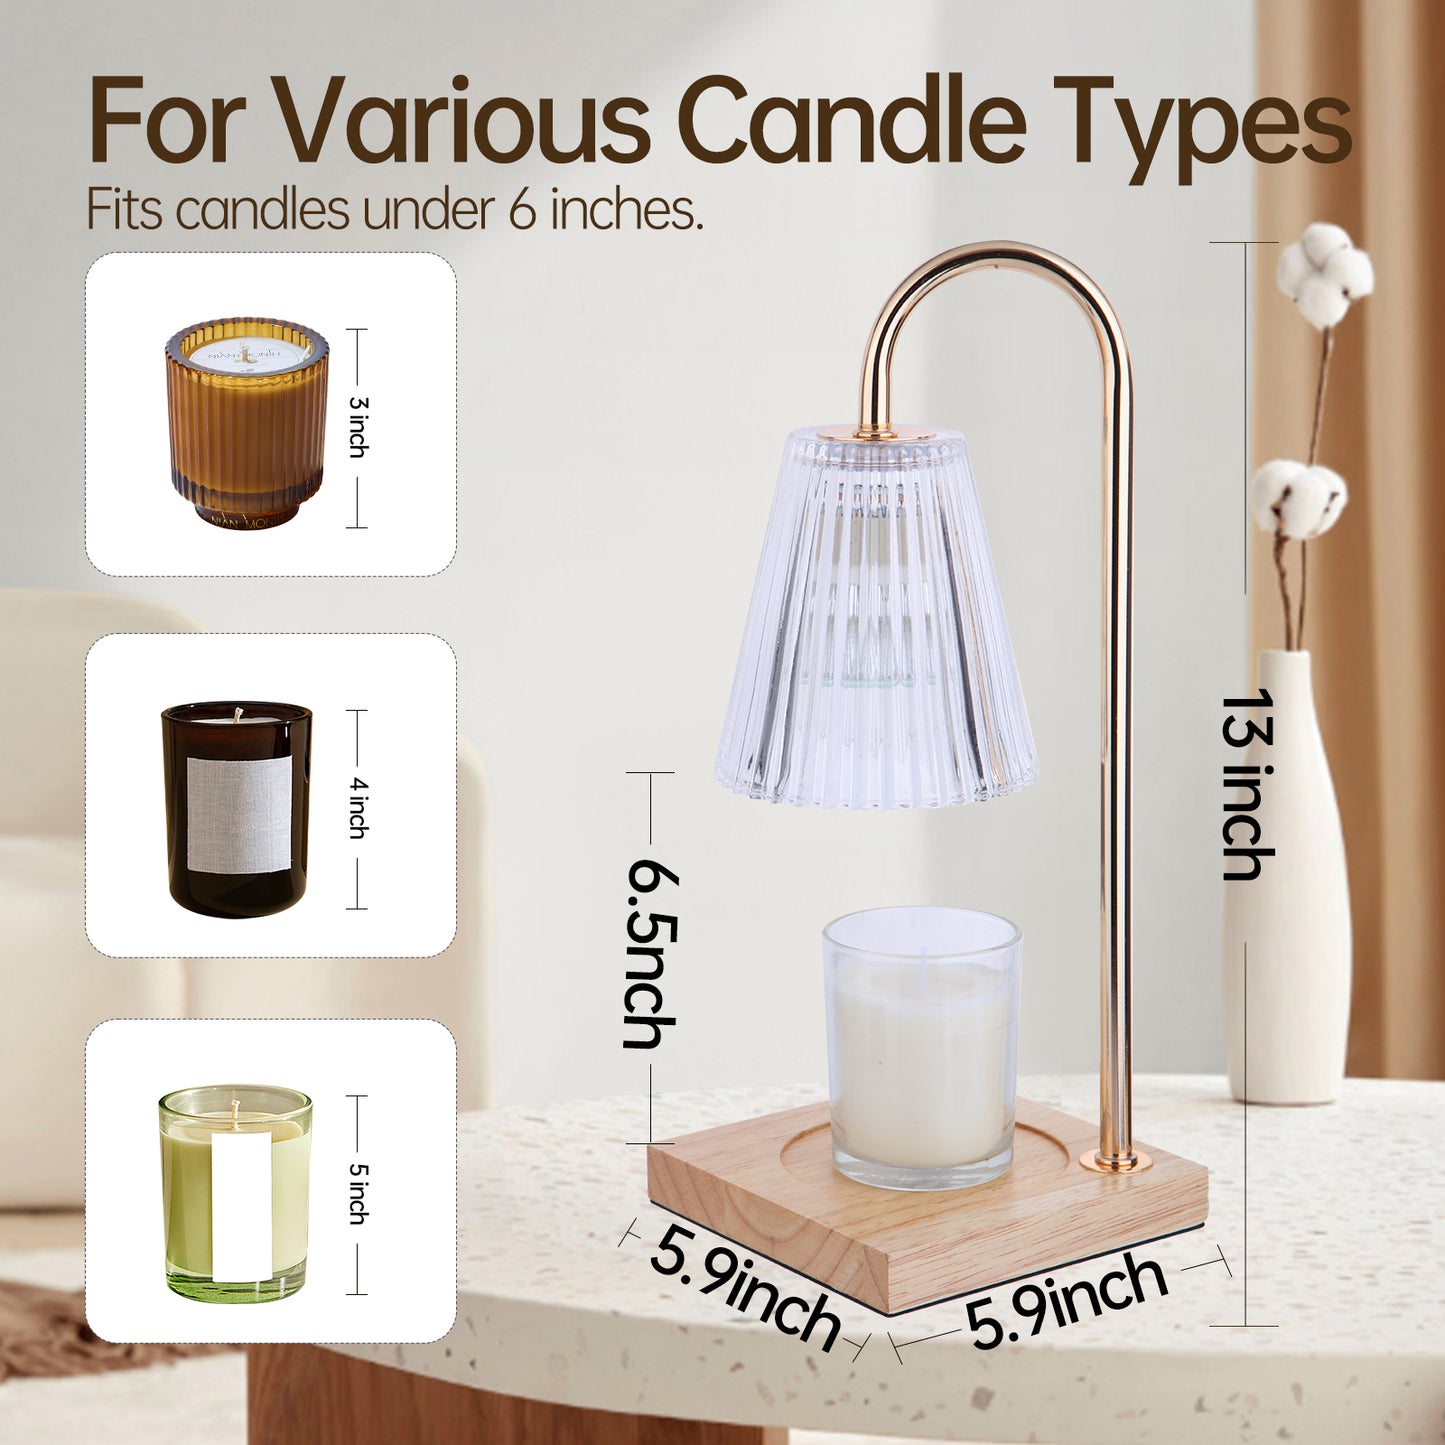 ZEMIRO CHARGE Candle Warmer Lamp with Timer & Dimmer, Electric Candle Warmer Light for Bedroom, Wax Melts Warmer for Candle Jars, Dimmable Nightstand Lamp (2 x GU10 Bulbs Included)